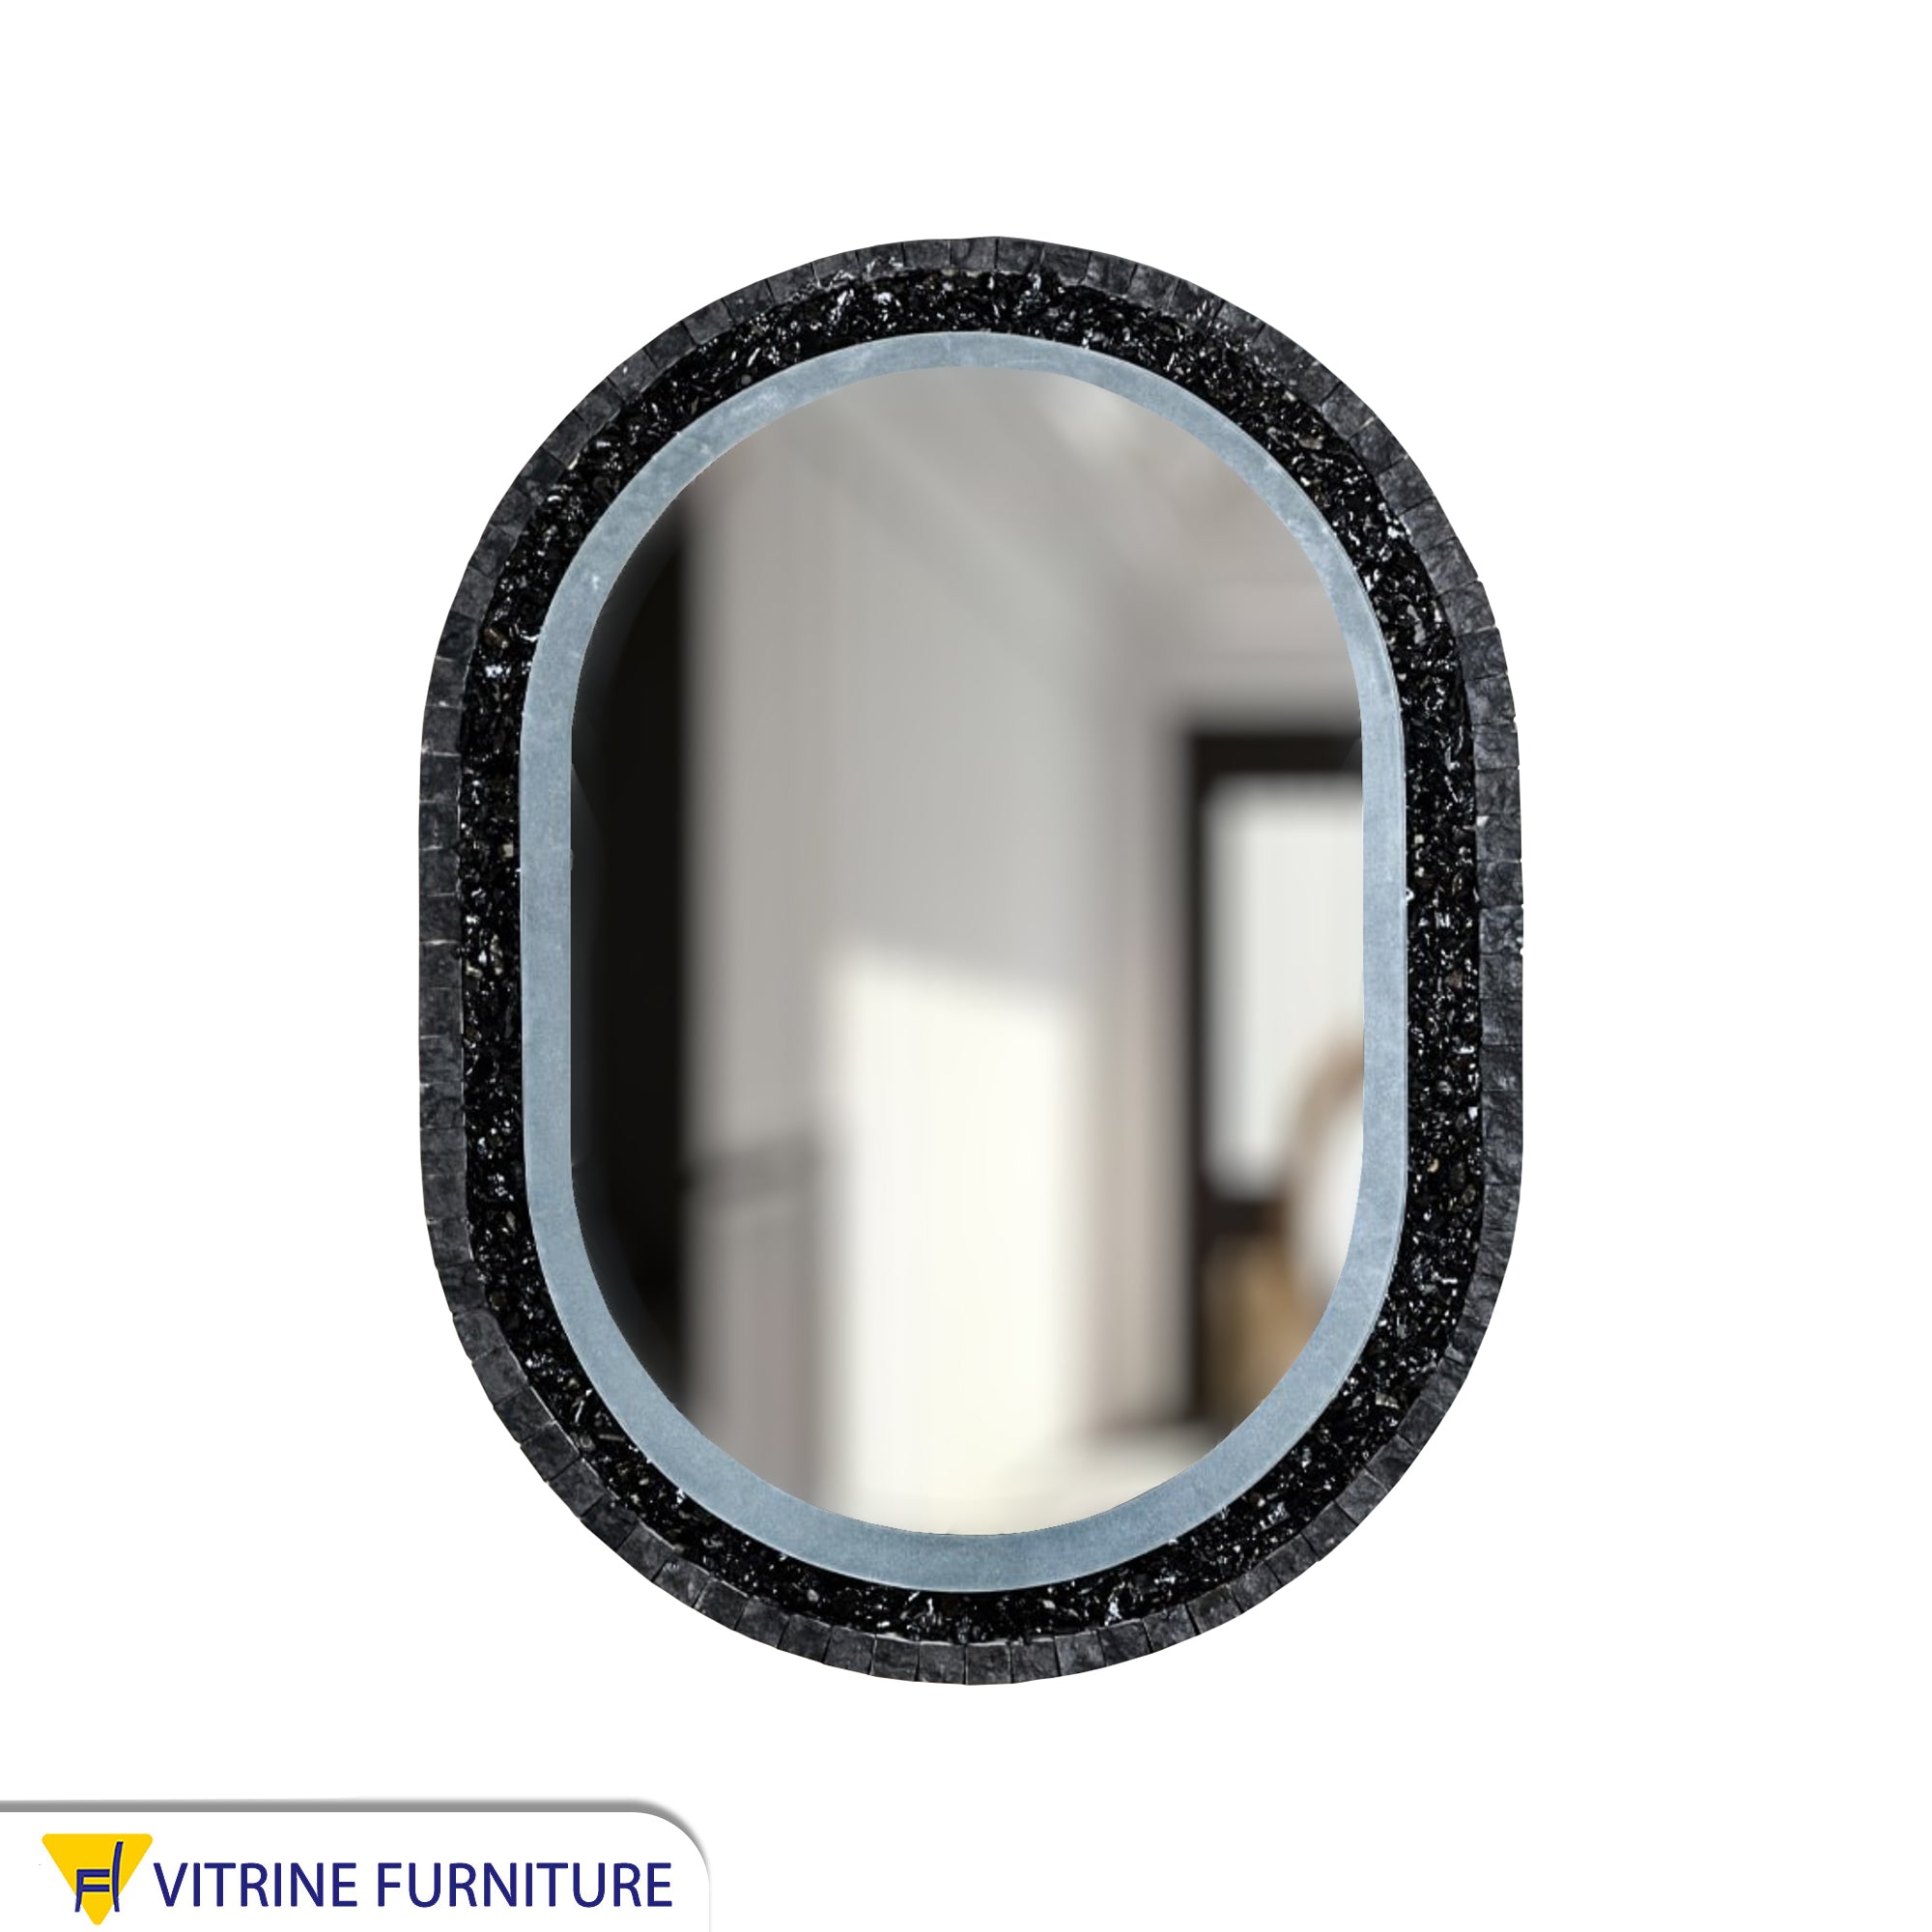 Oval LED mirror with black frame